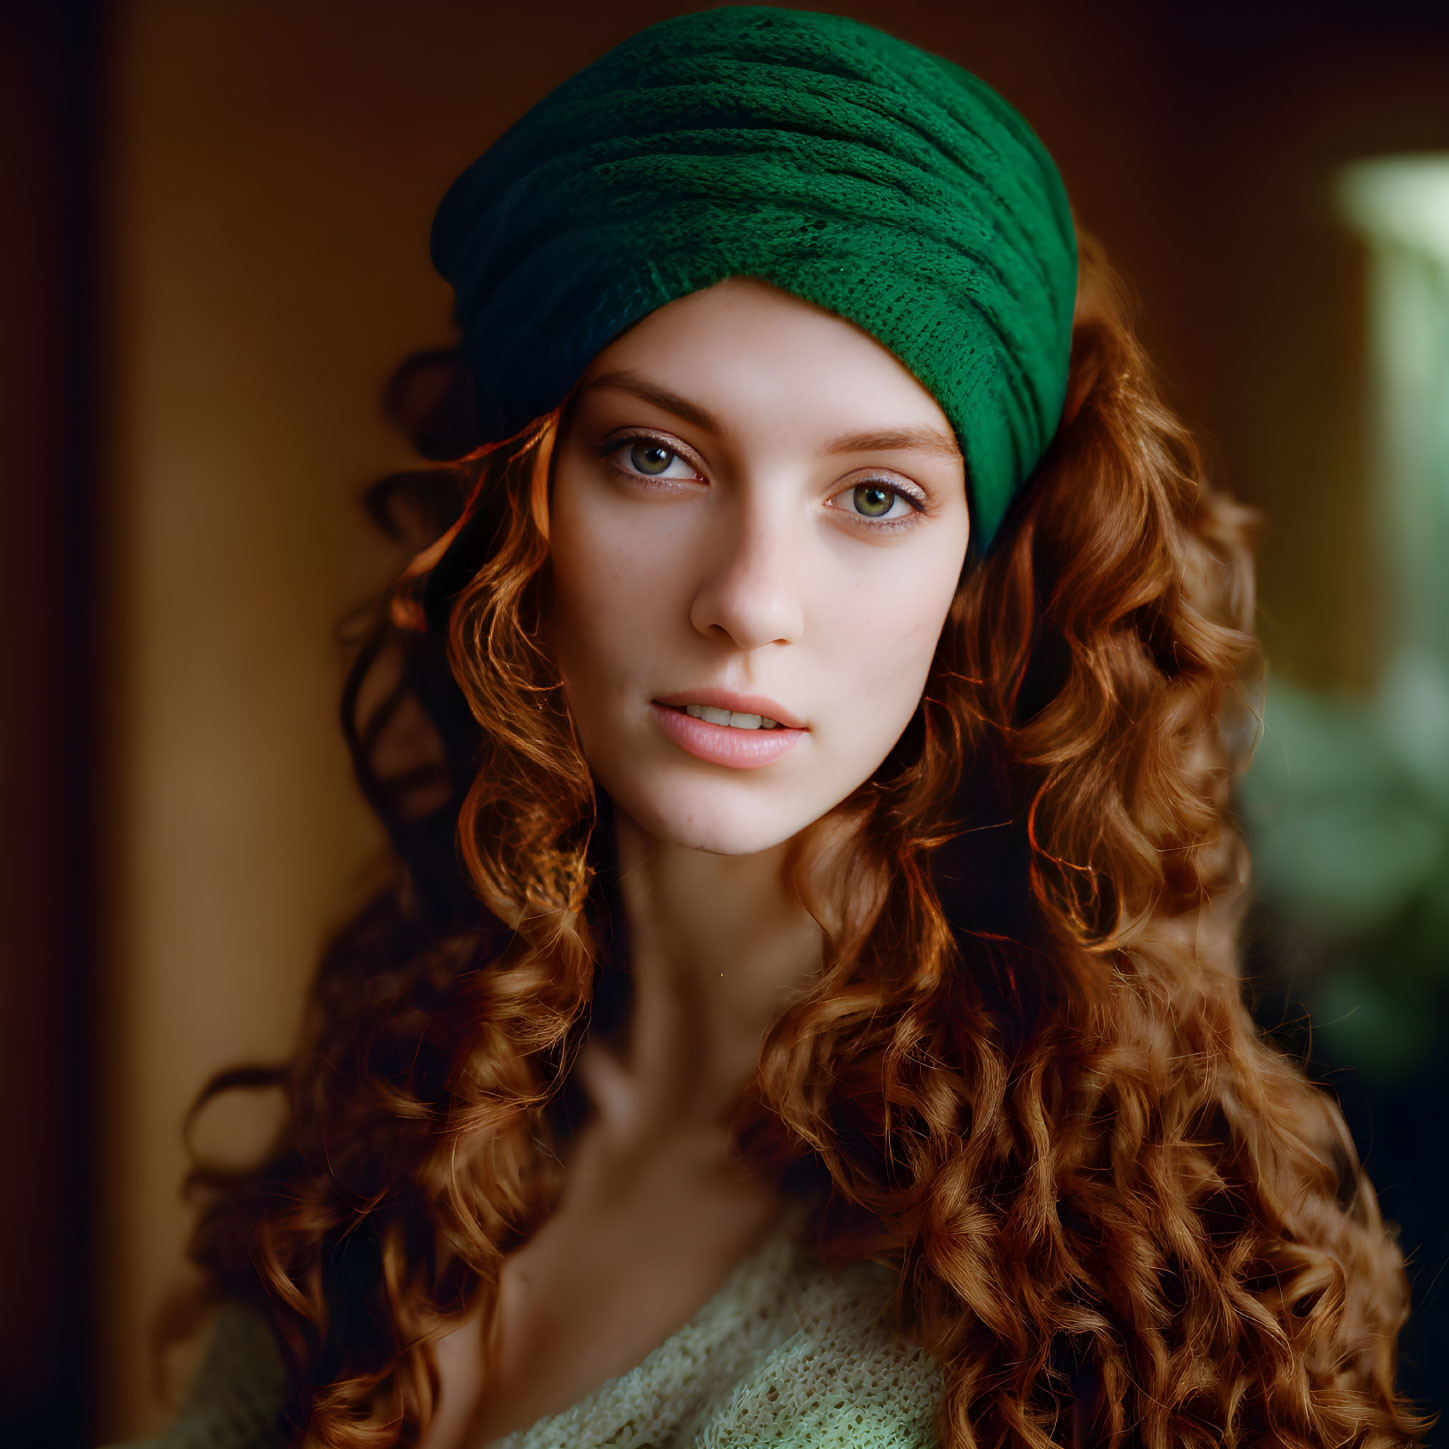 Curly red-haired woman in green turban gazes softly at camera in warm, blurred setting